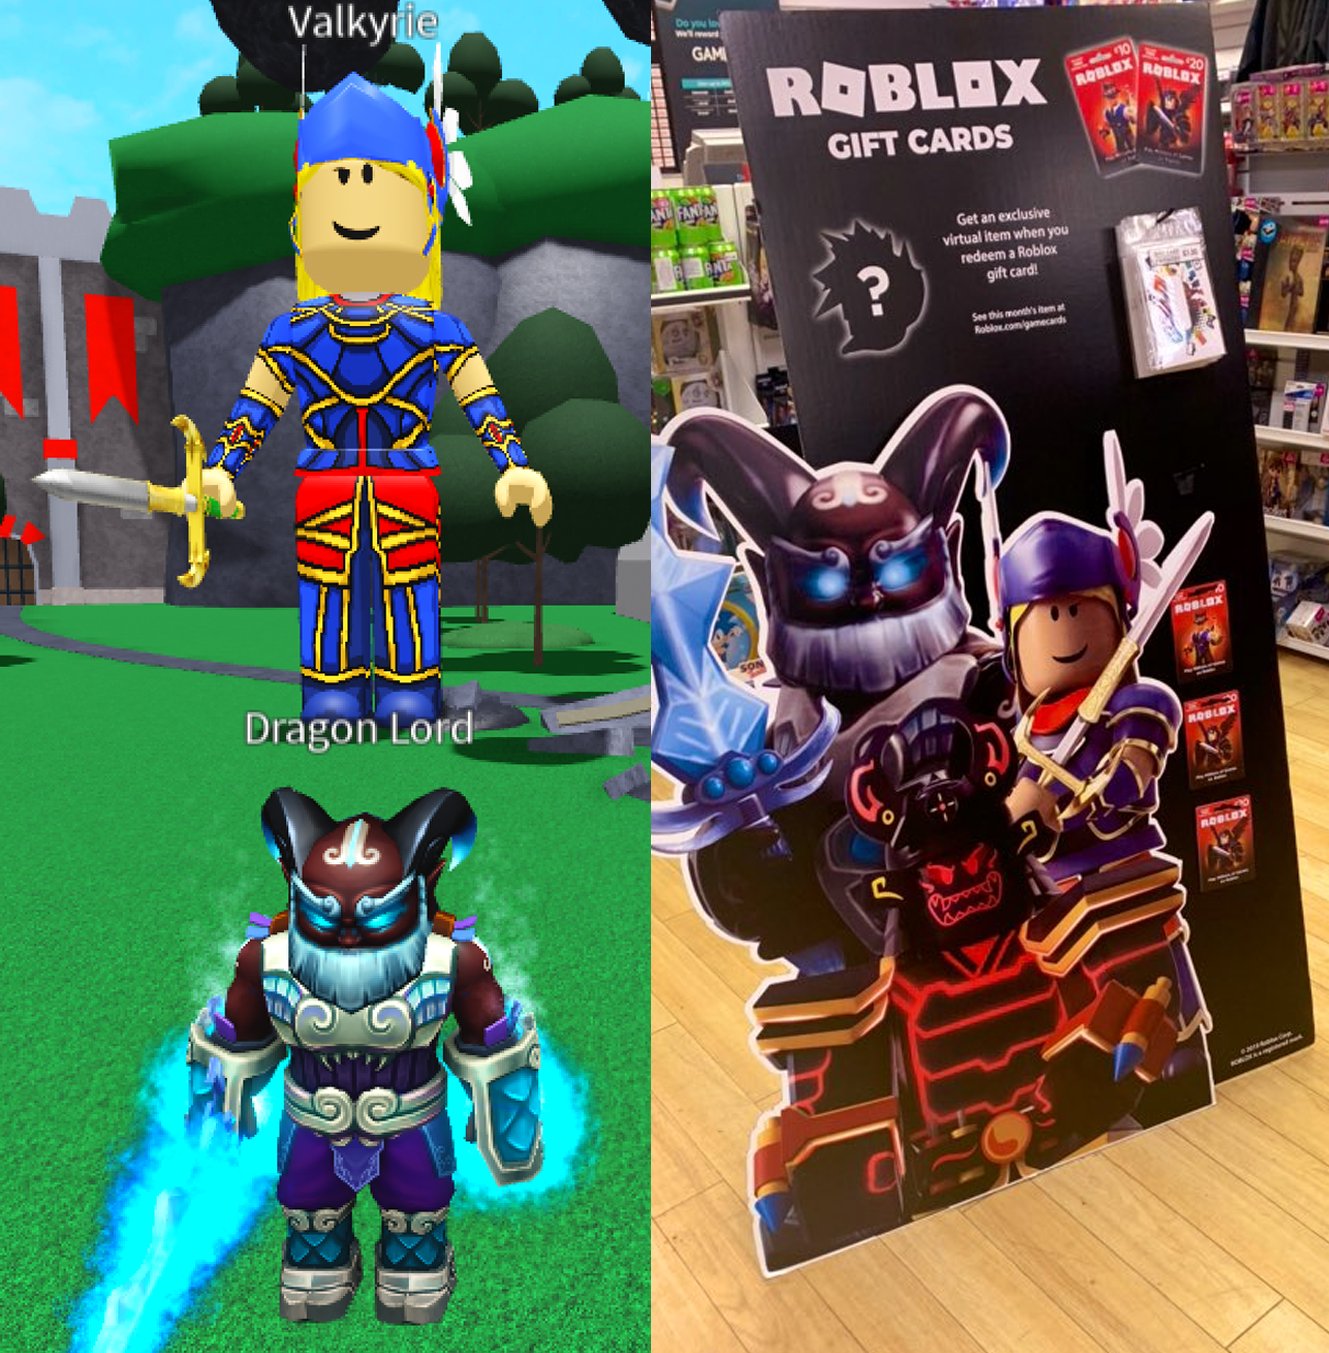 Coolbulls On Twitter Shoutout To Roblox For Including Two Summoner Tycoon Characters On Their Gift Card Cutout Really Cool To See Roblox Https T Co K3matzhztz